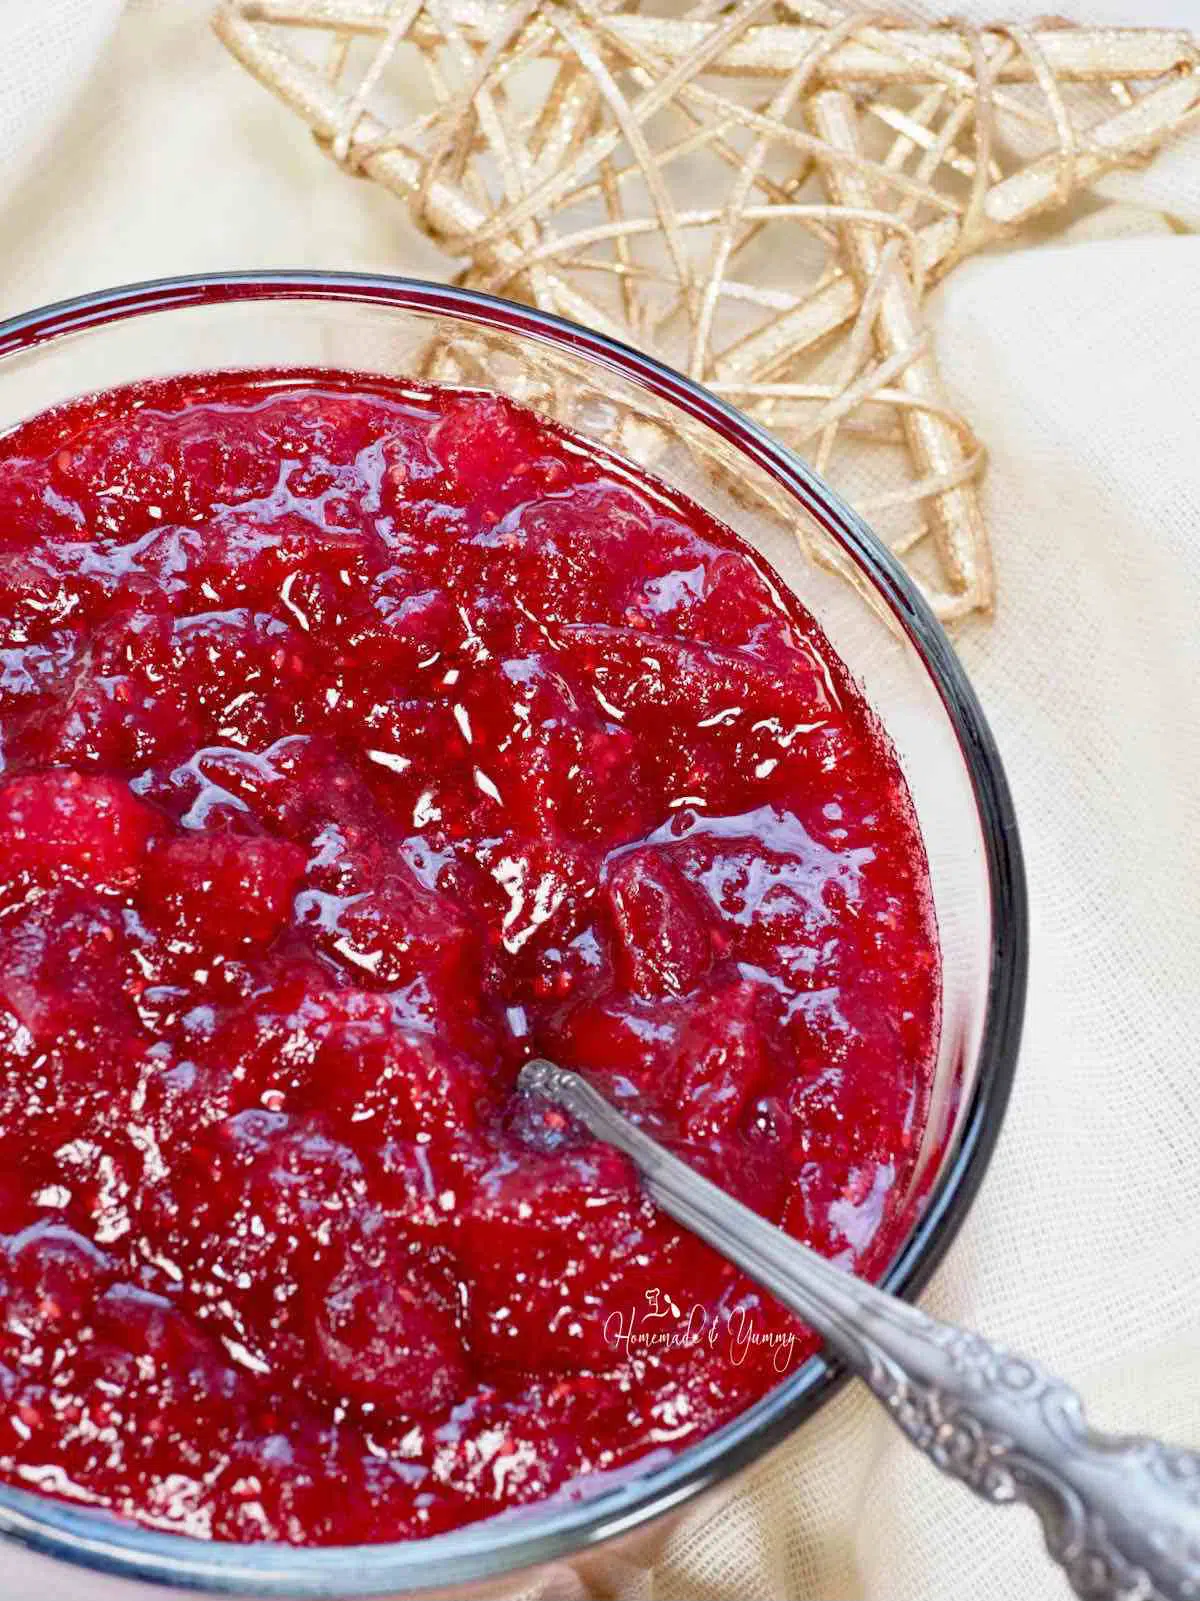 A dish of cranberry sauce on the holiday dinner table.